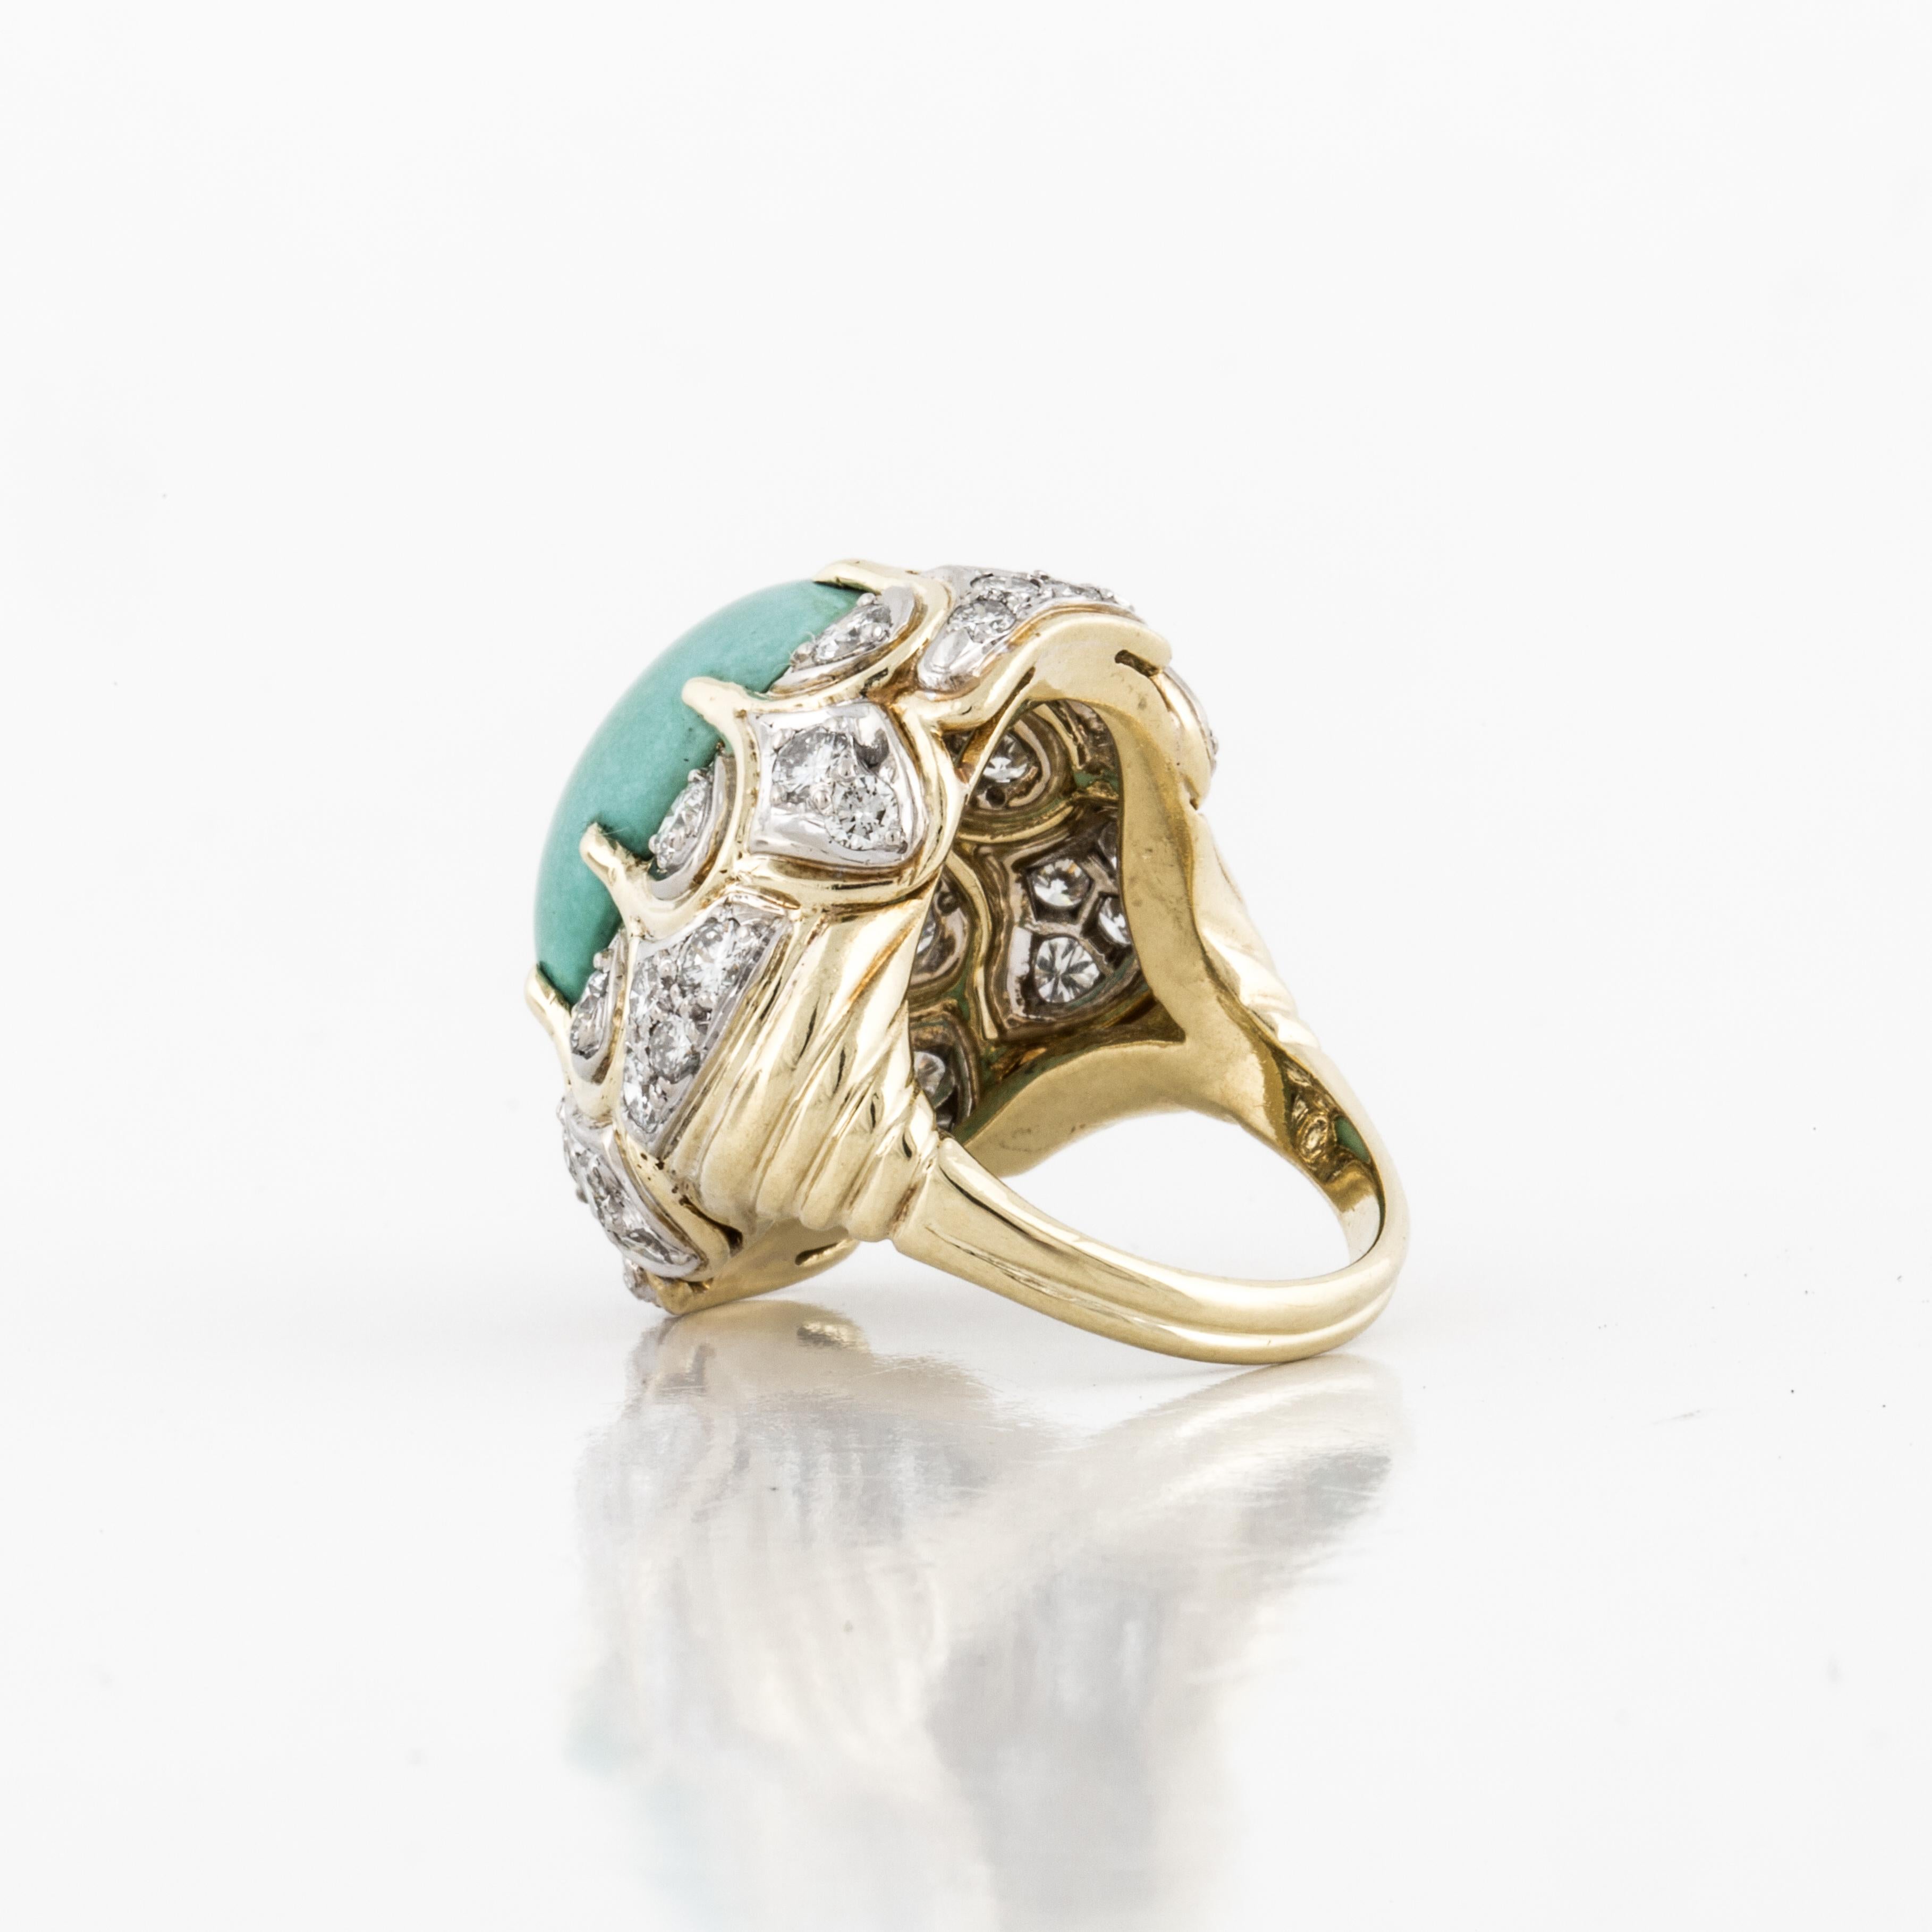 Turquoise Diamond Ring in 18K Gold In Good Condition For Sale In Houston, TX